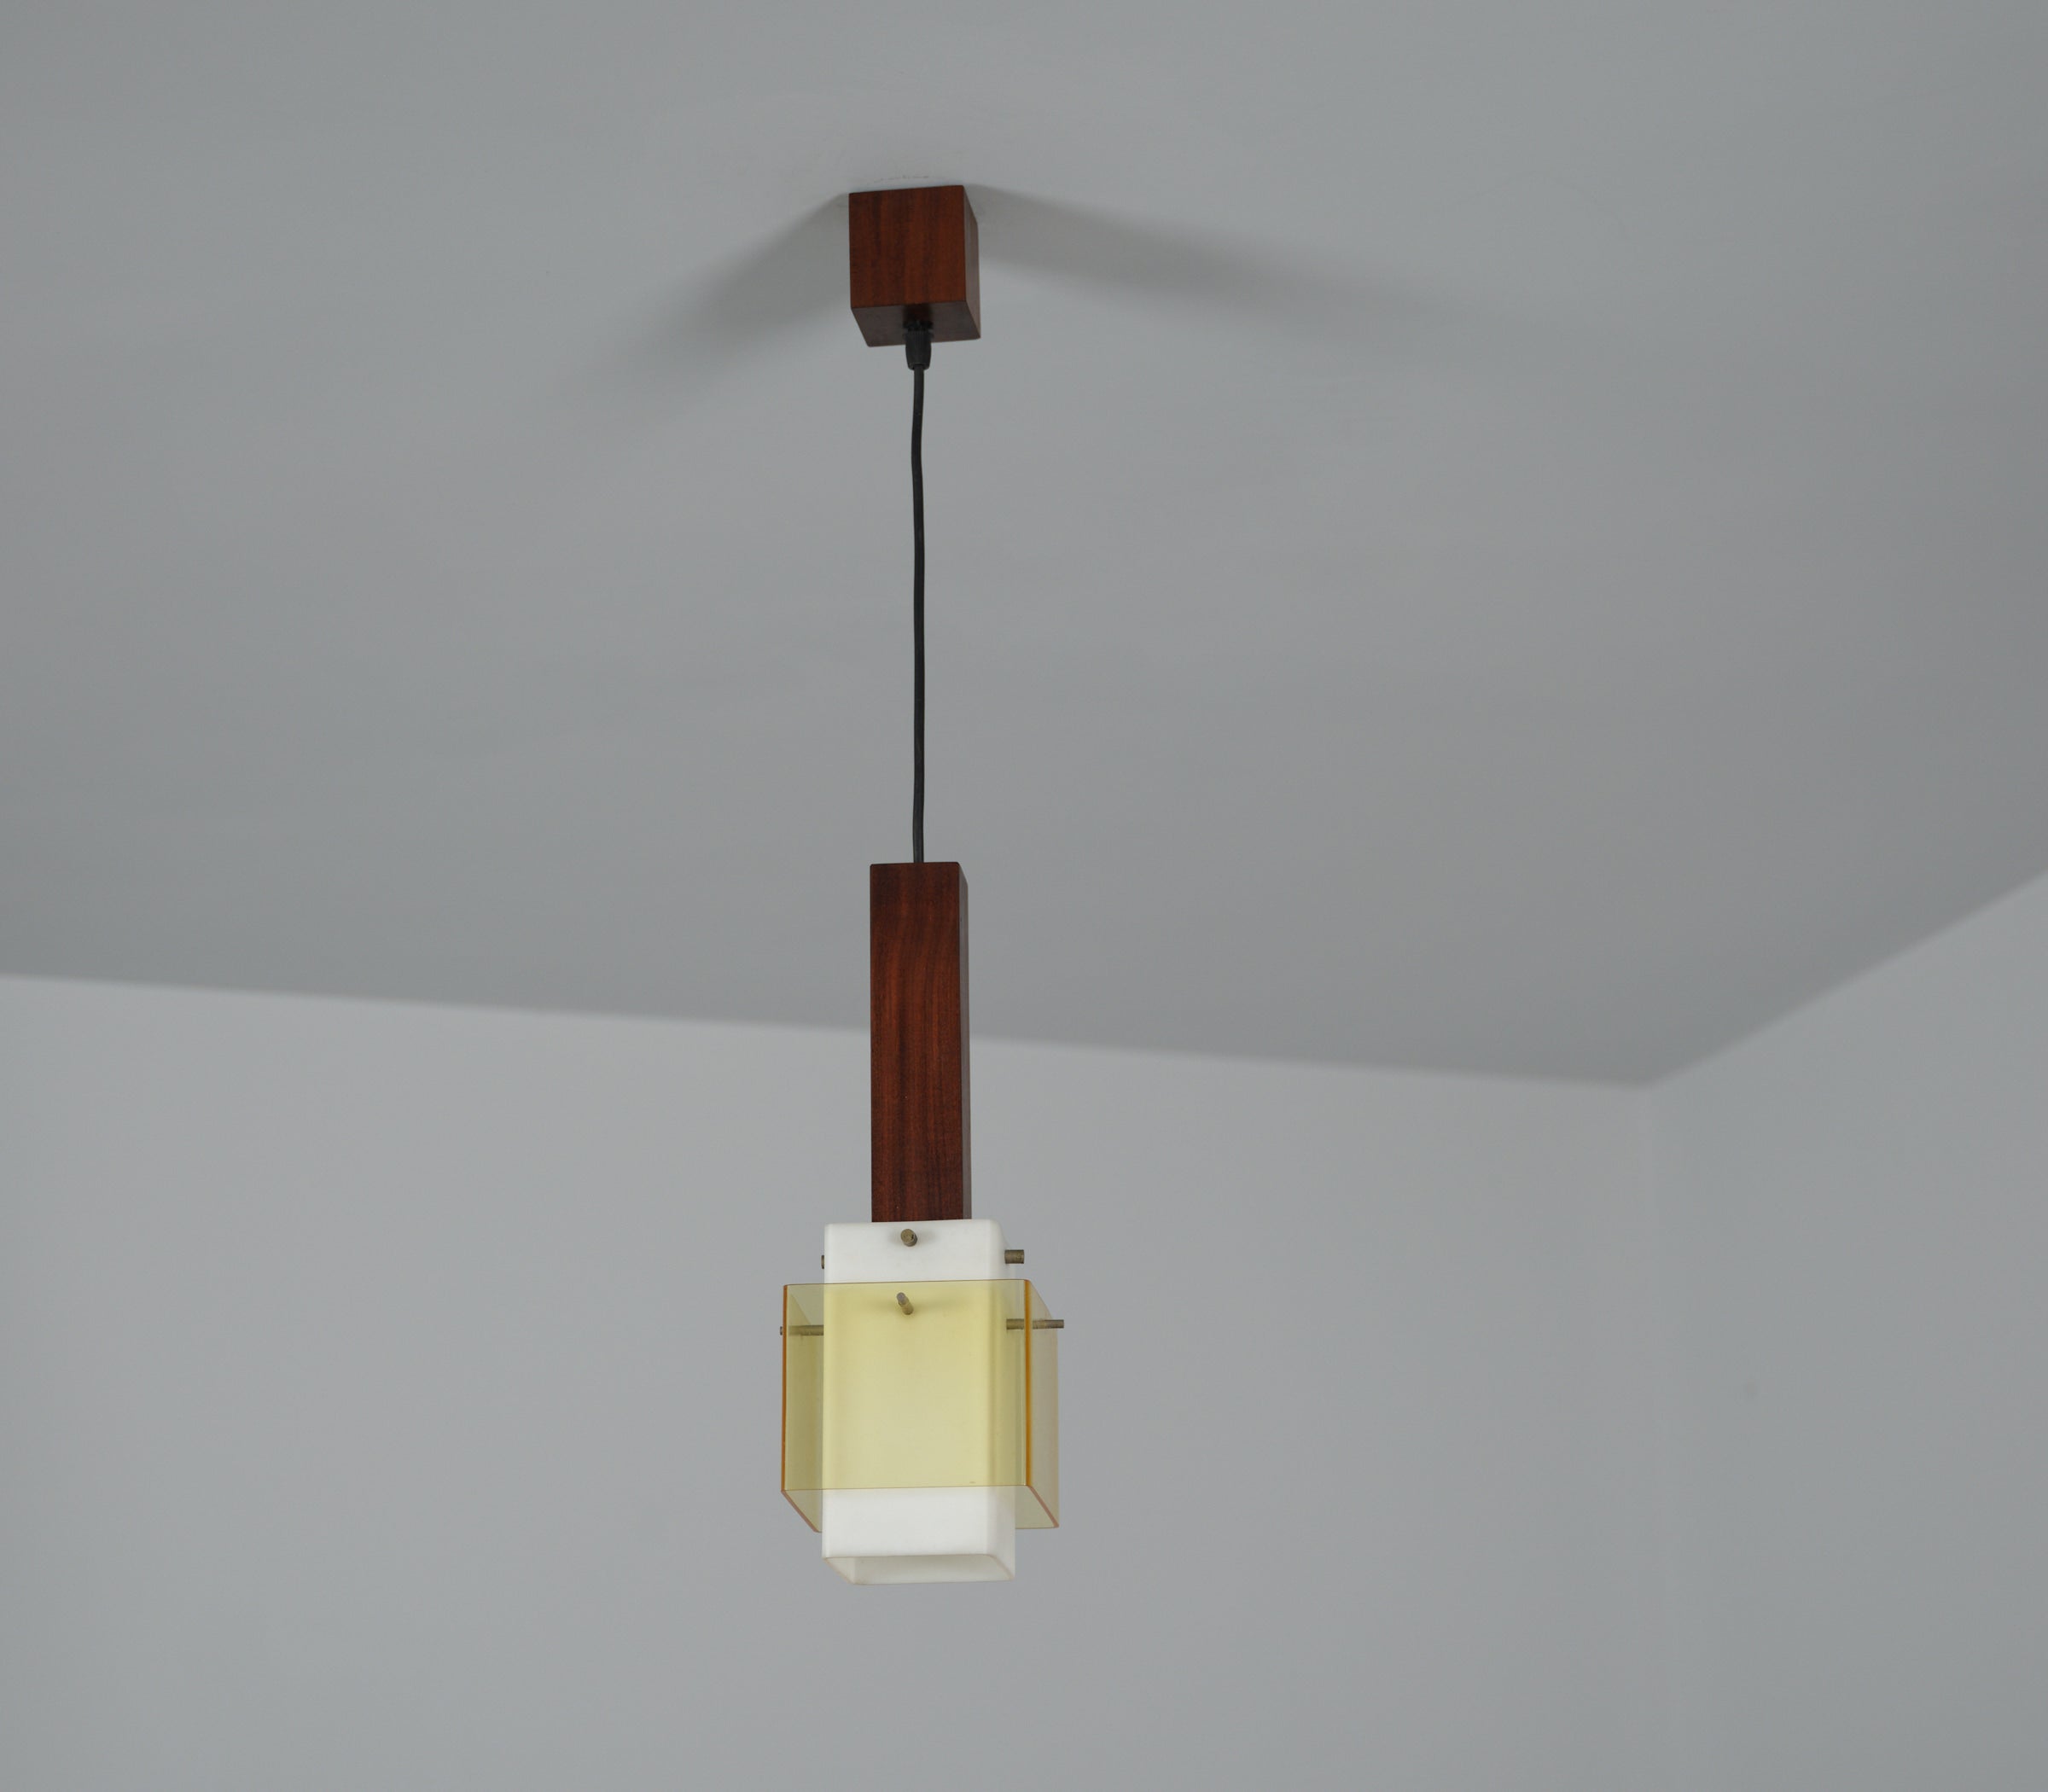 Presenting an Italian pendant lamp hailing from the 1960s. Crafted with a profound appreciation for design and quality, this lamp features a rich, dark teak wooden structure. The centerpiece of this pendant is the milk perspex shade, casting a warm